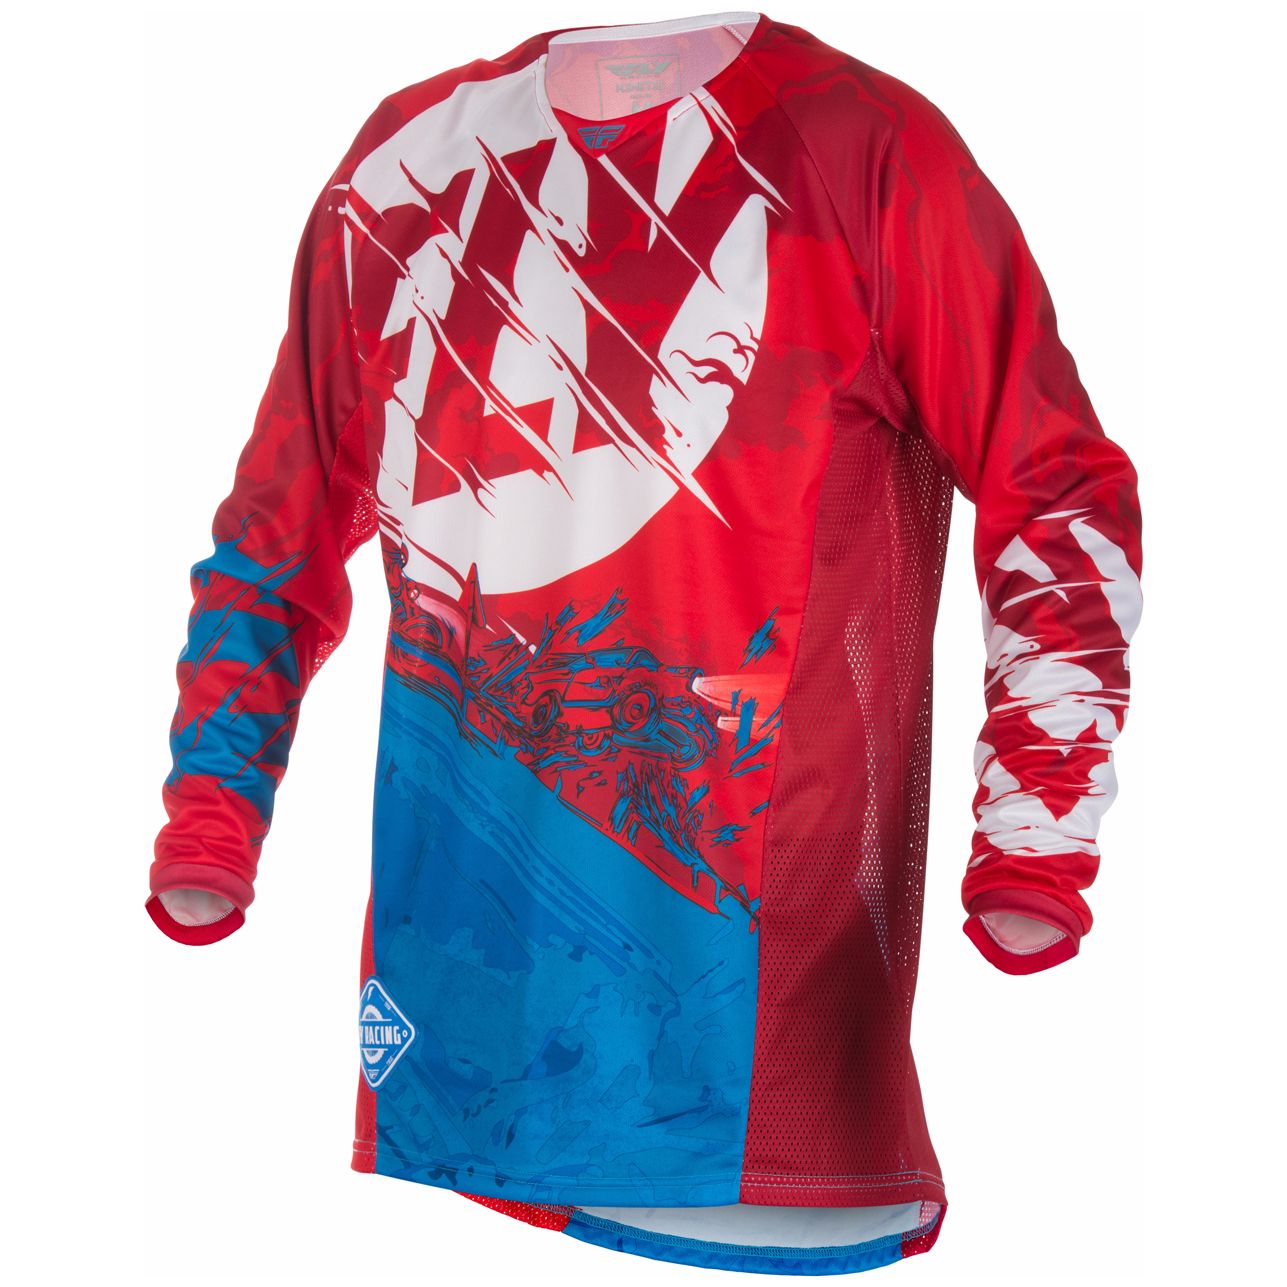 Maillot Cross Fly Kinetic Outlaw - Rouge Blanc Bleu -